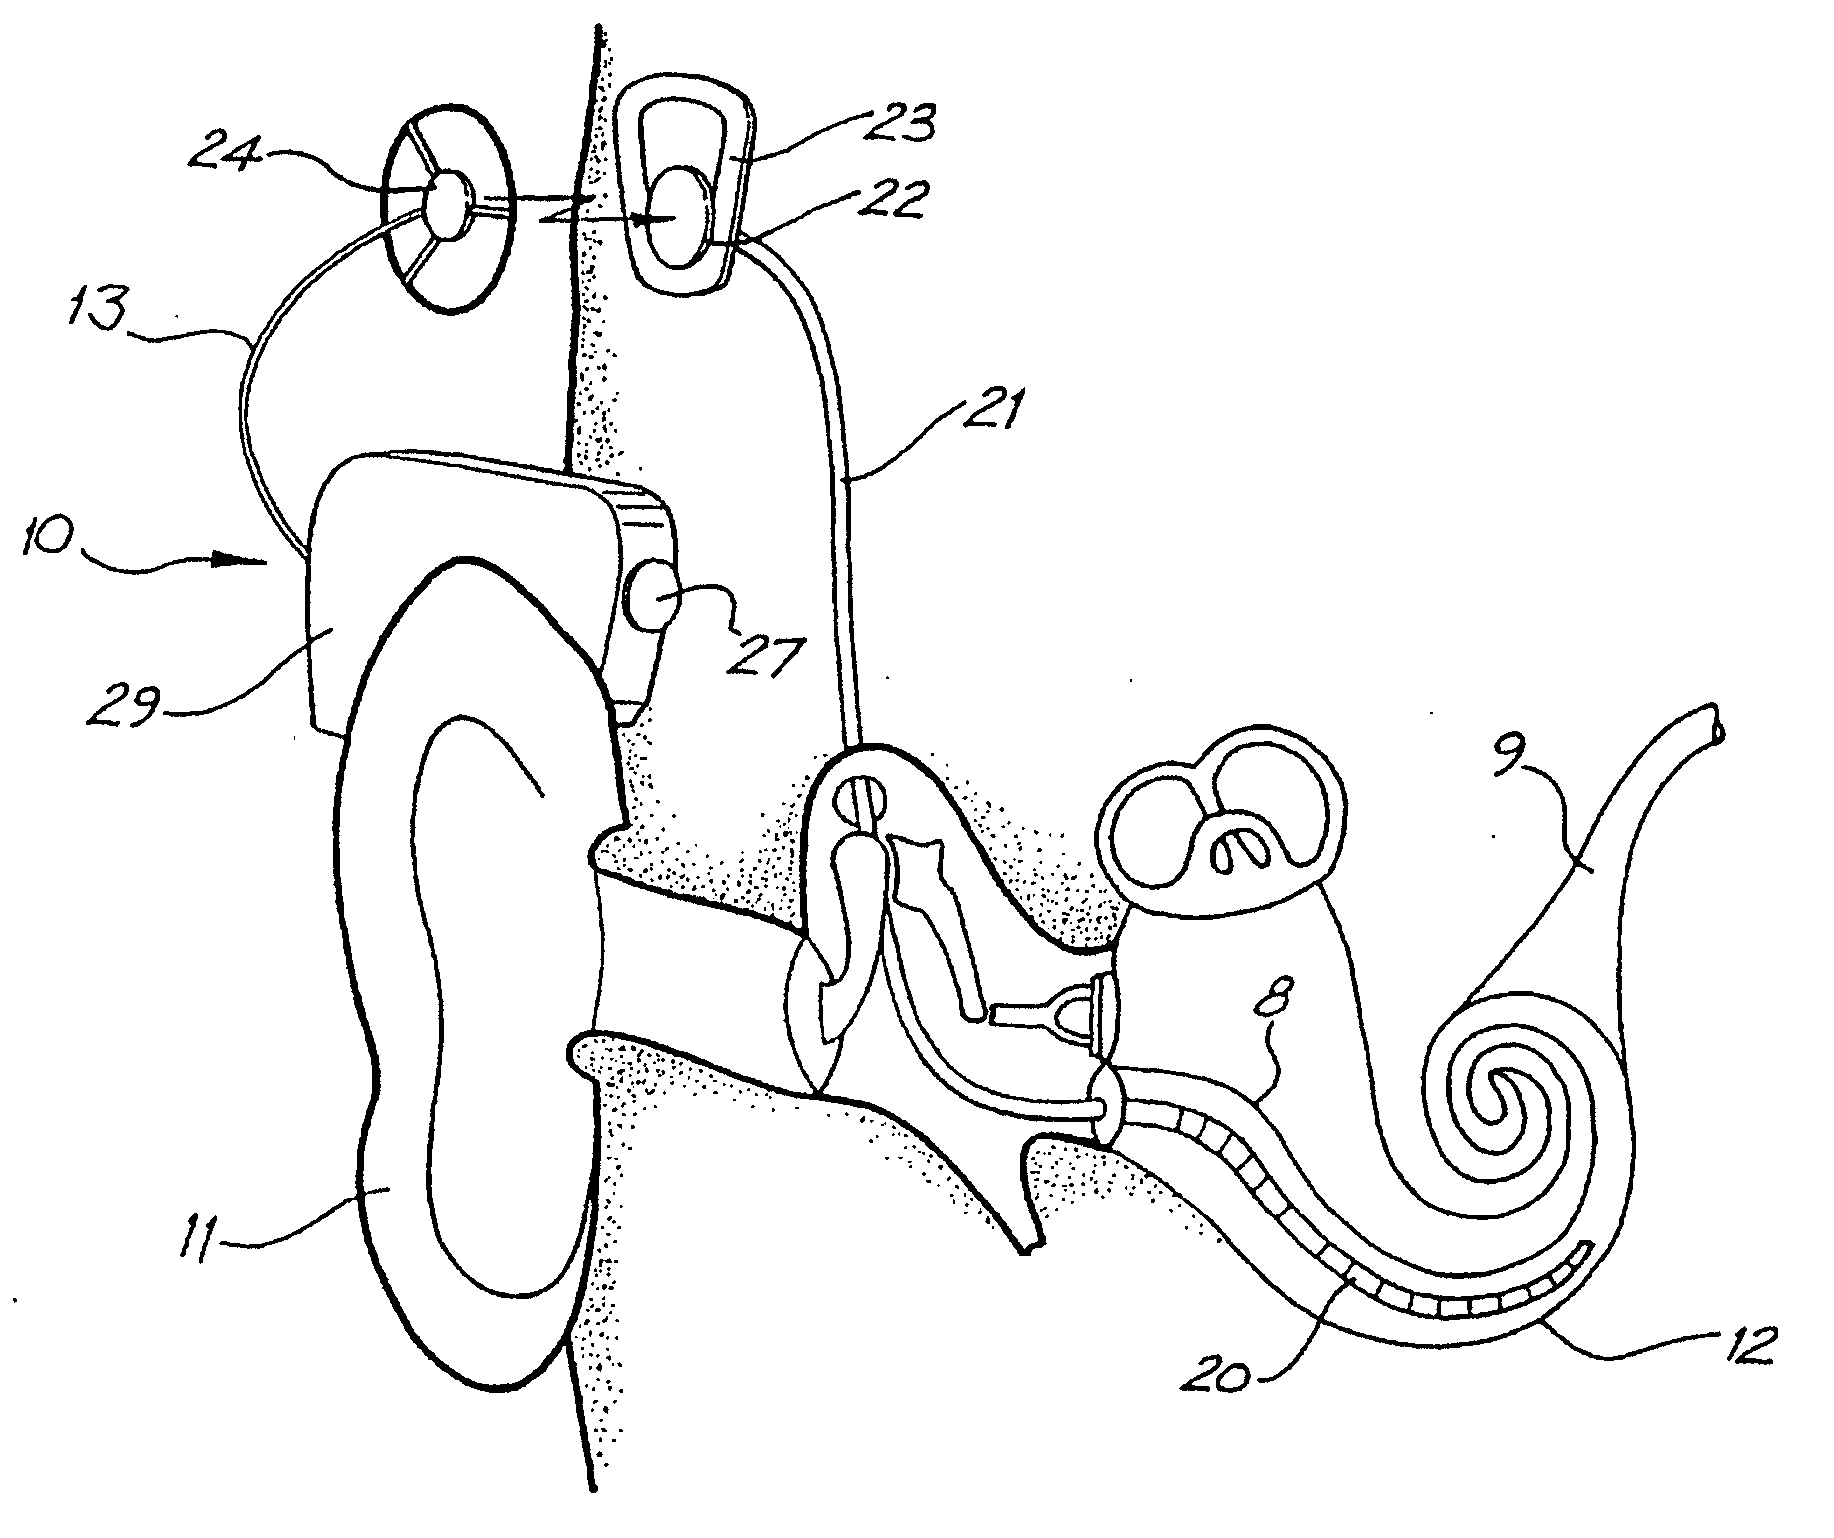 Power supply for a cochlear implant